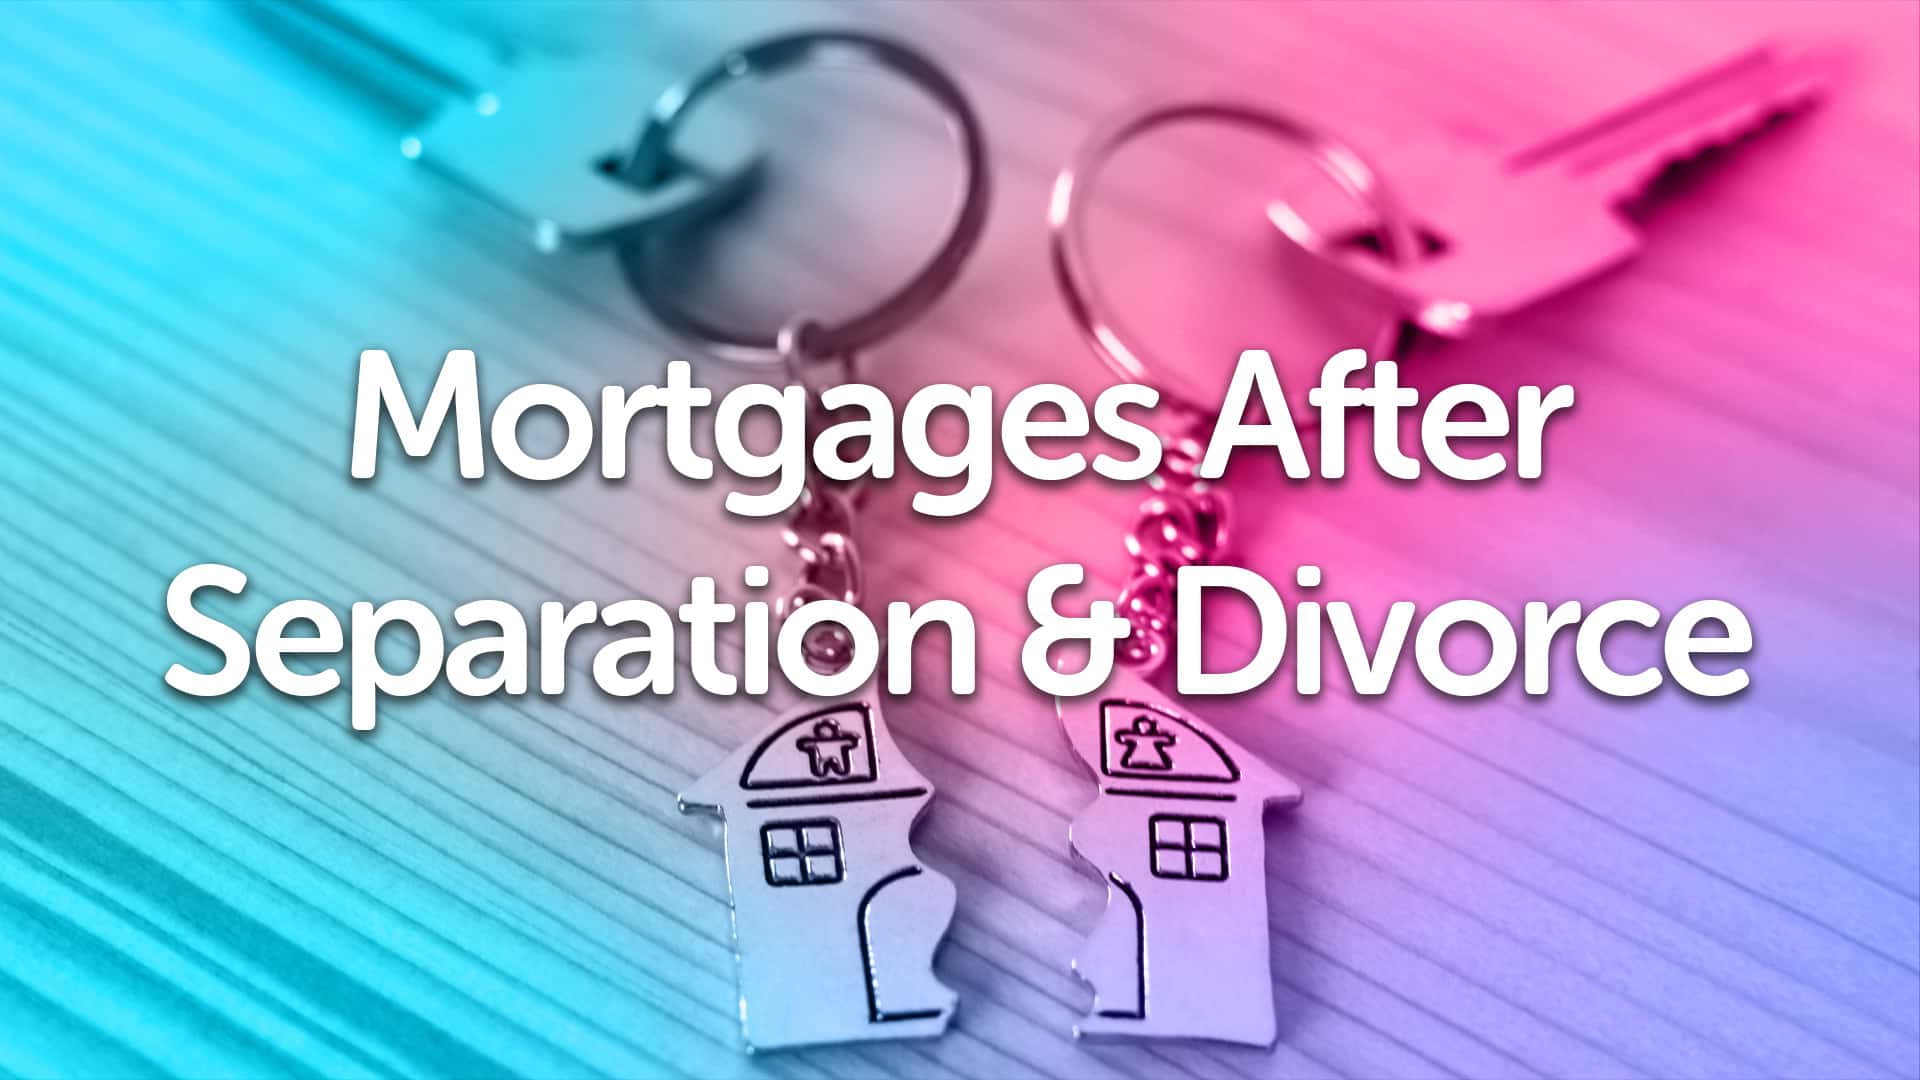 Divorce & Separation Mortgage Advice in Hull